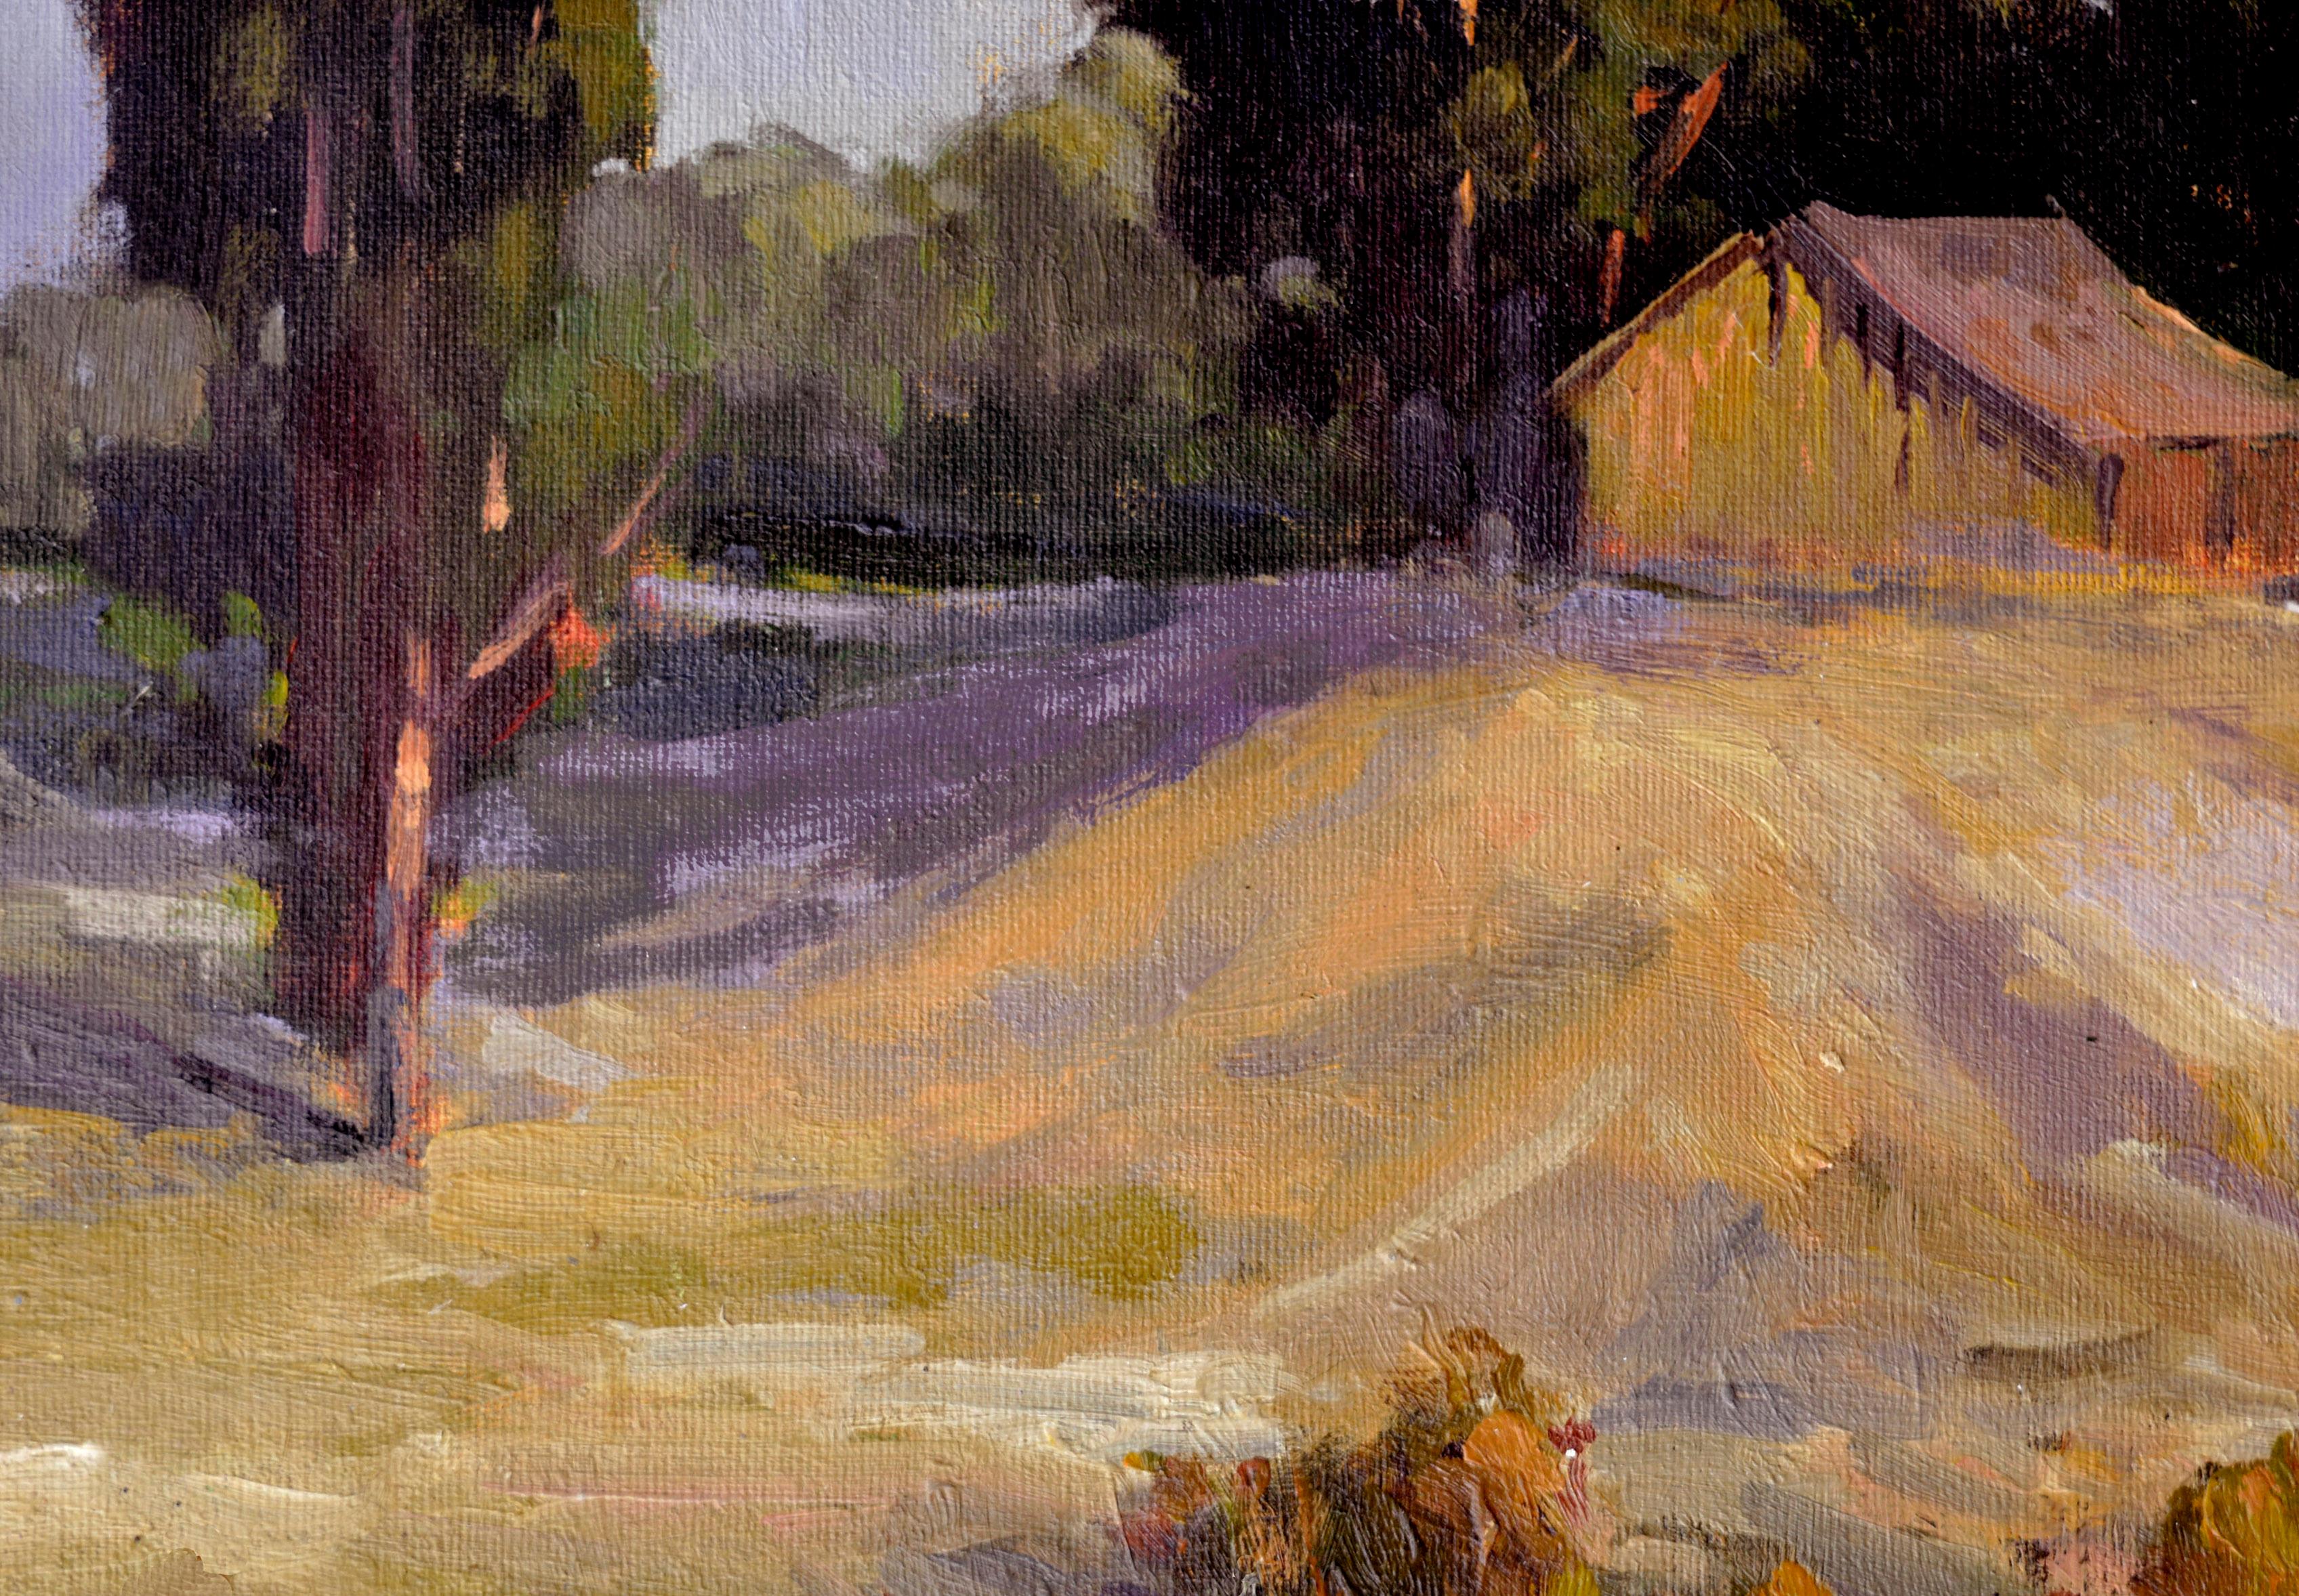 Carmel Valley Barn Landscape  - Painting by Unknown